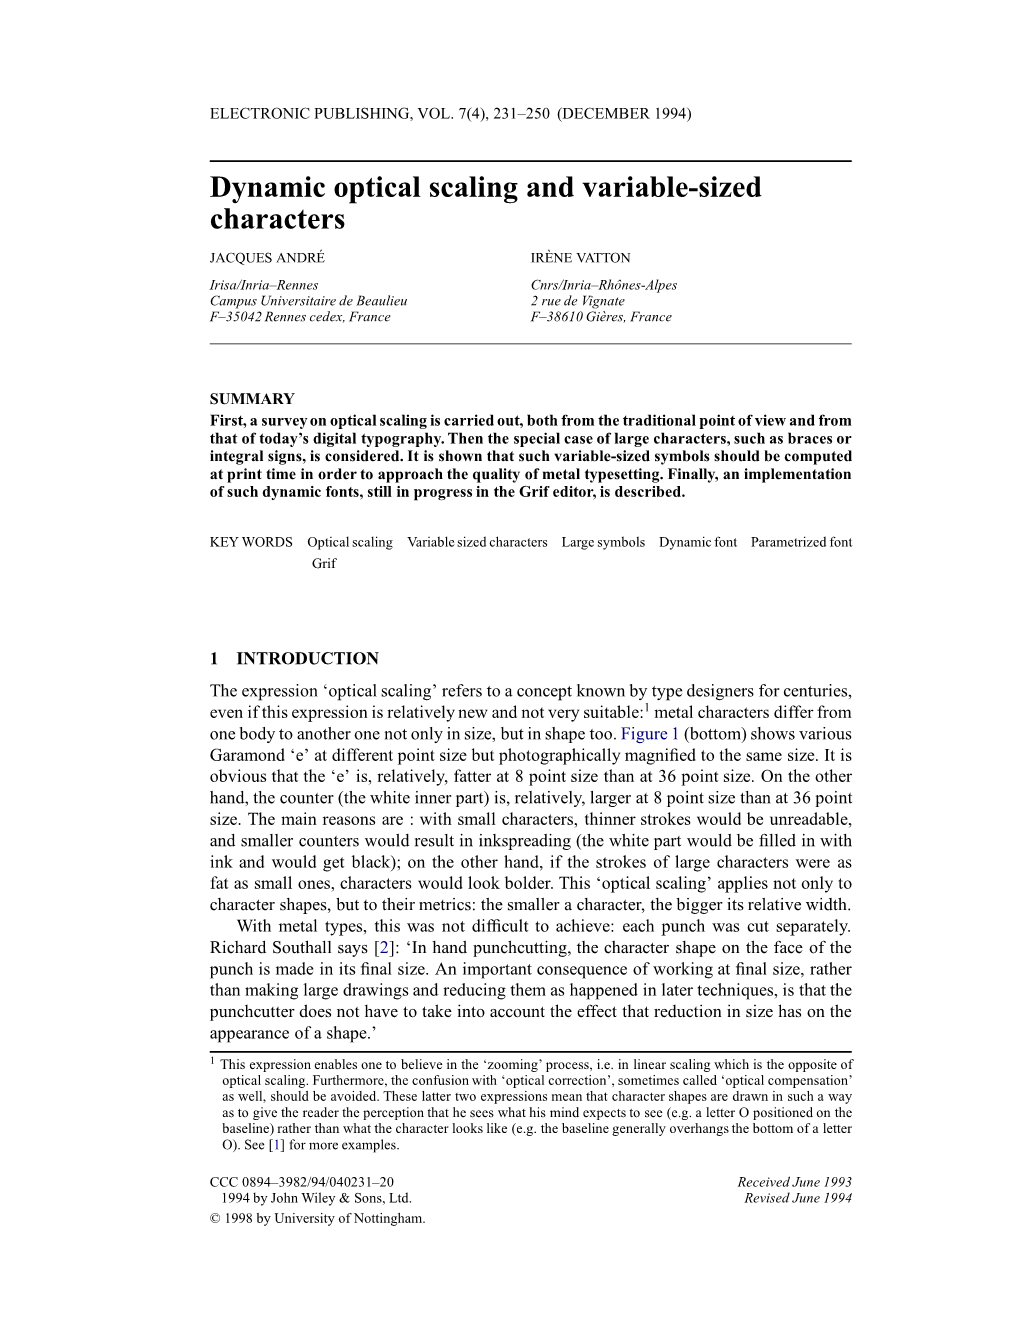 Dynamic Optical Scaling and Variable-Sized Characters